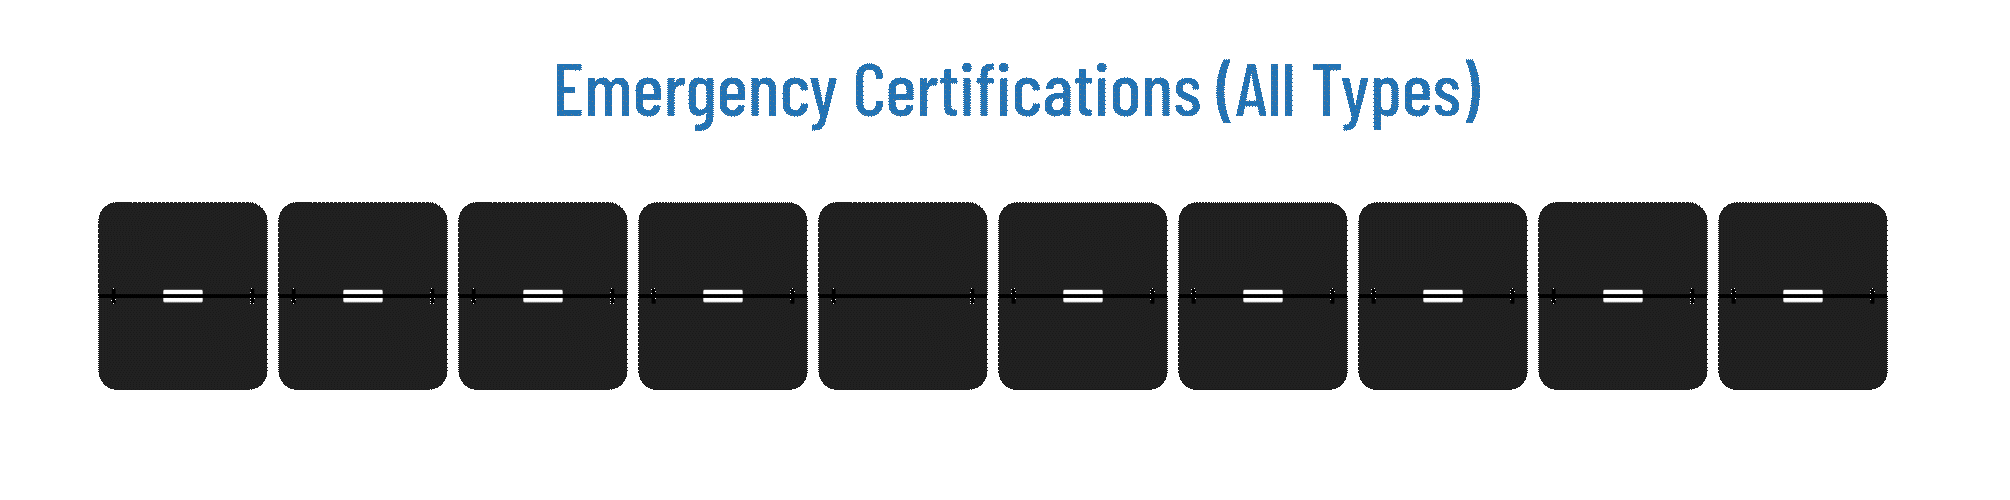 Emergency Certifications (All Types): less than 1  Week